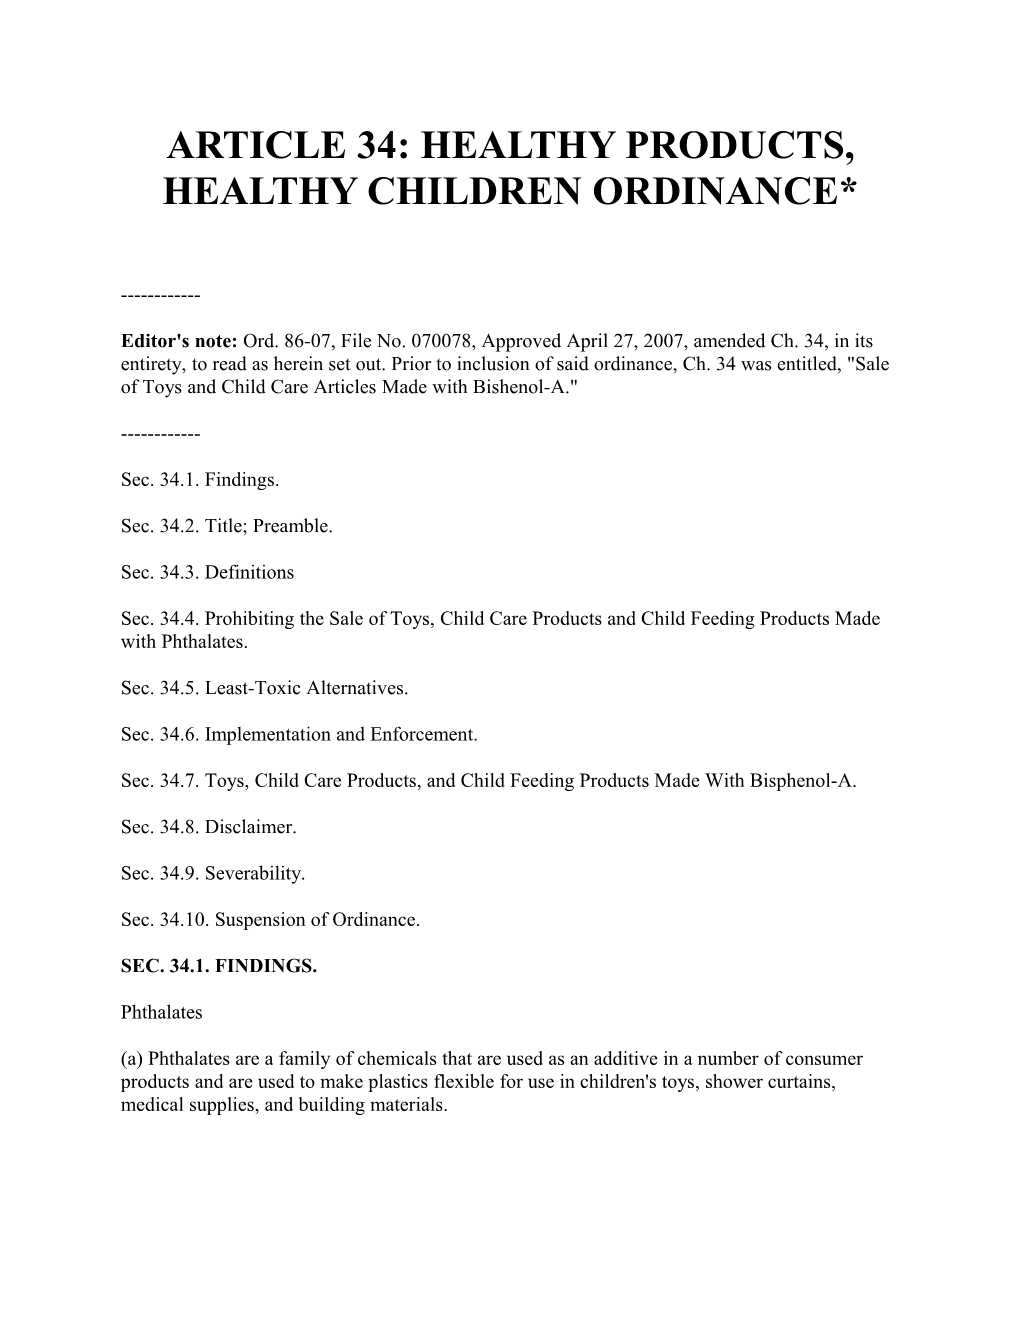 Article 34: Healthy Products, Healthy Children Ordinance*